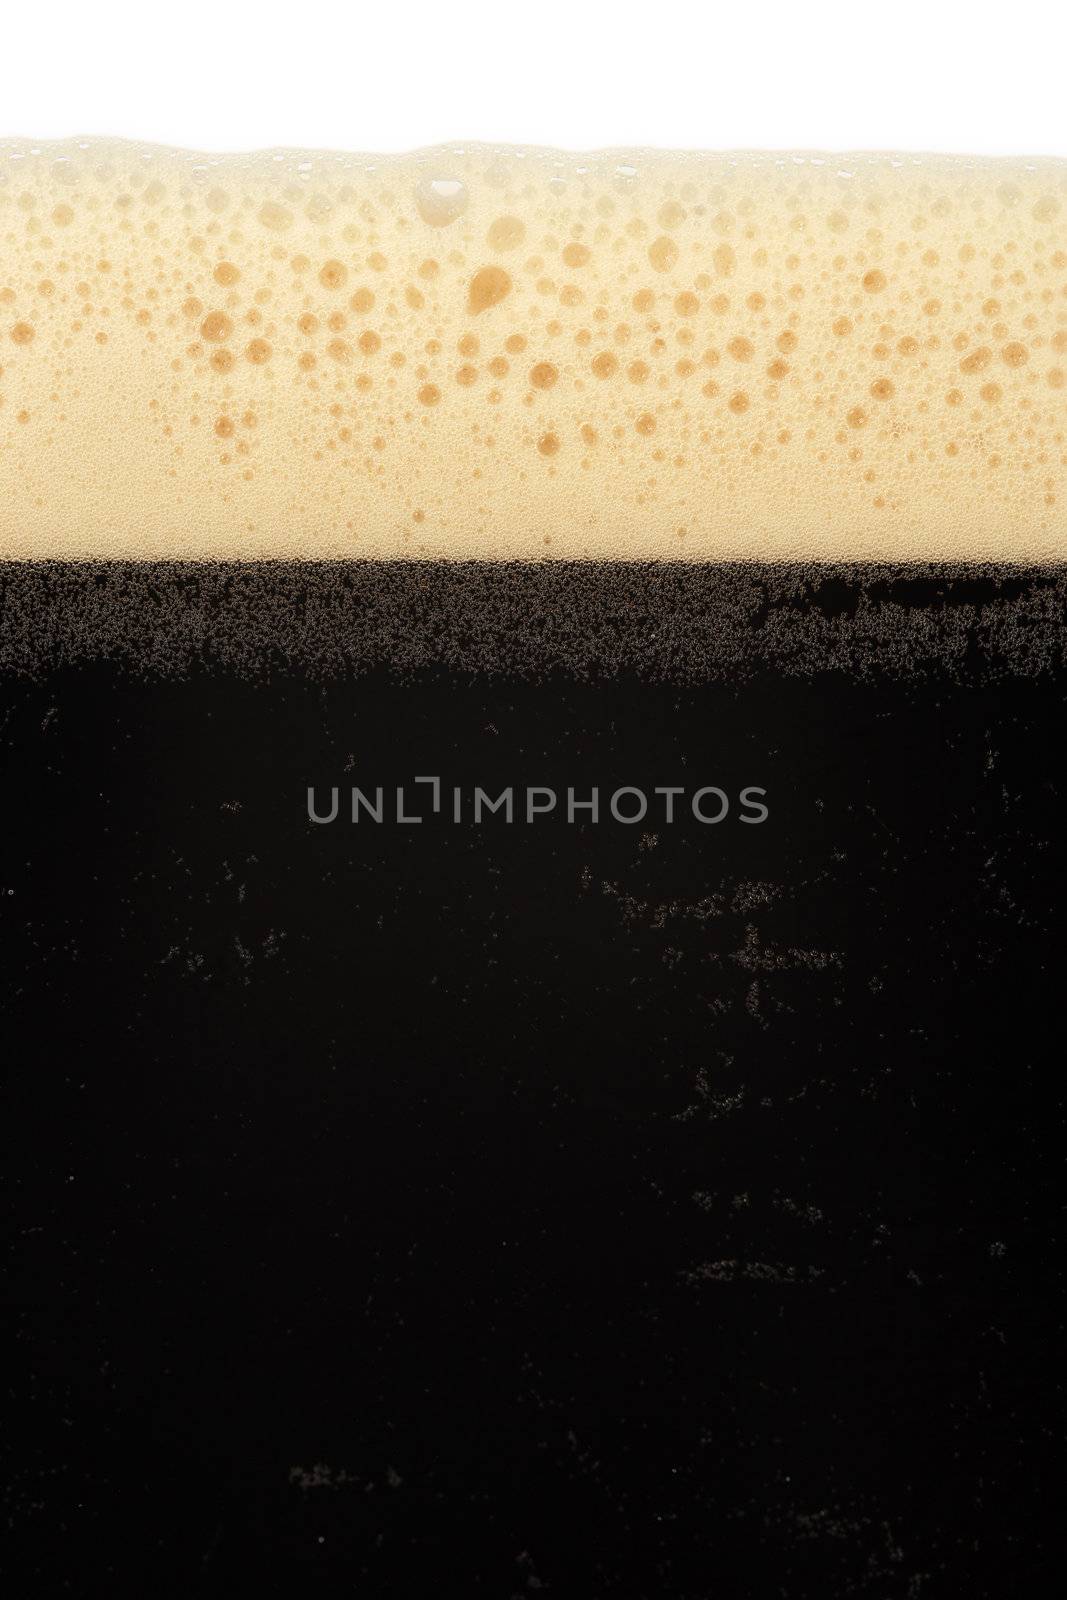 A macro image of a glass of stout beer or bitter.
